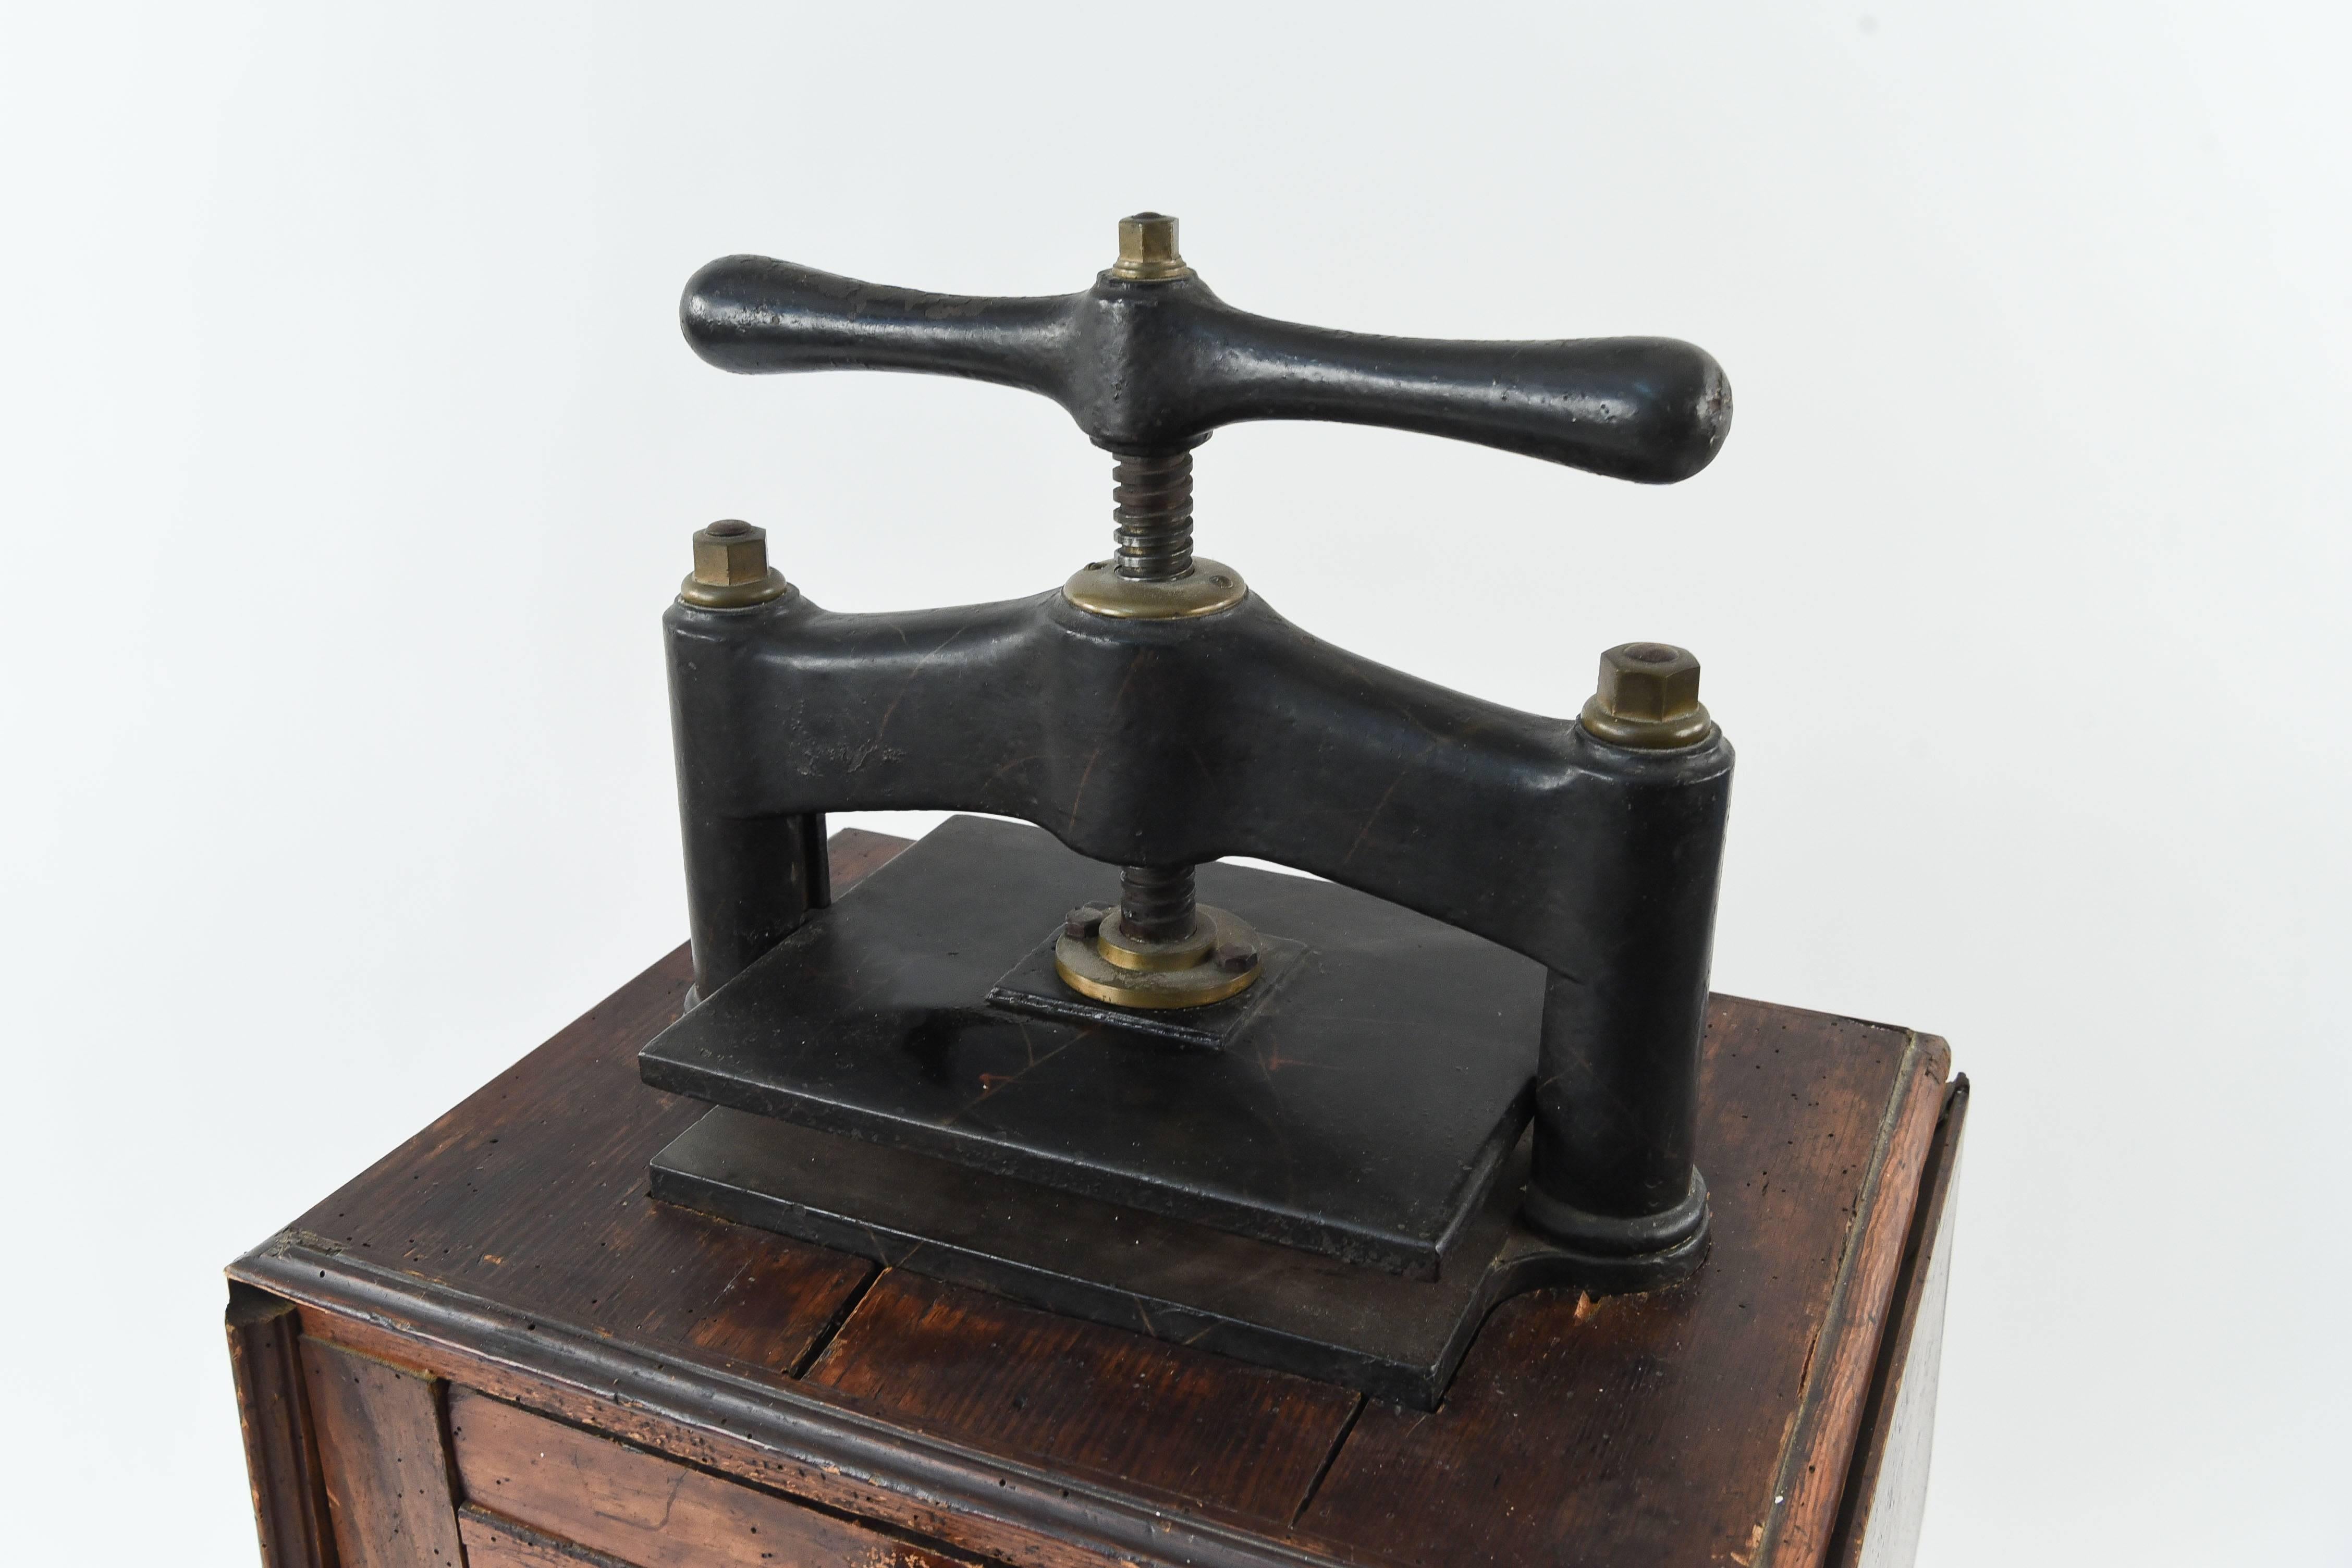 A great historical example of a 19th century book press complete with original three-drawer work table base. The base has great patina and very old holes in the wood showing the great age of the piece.